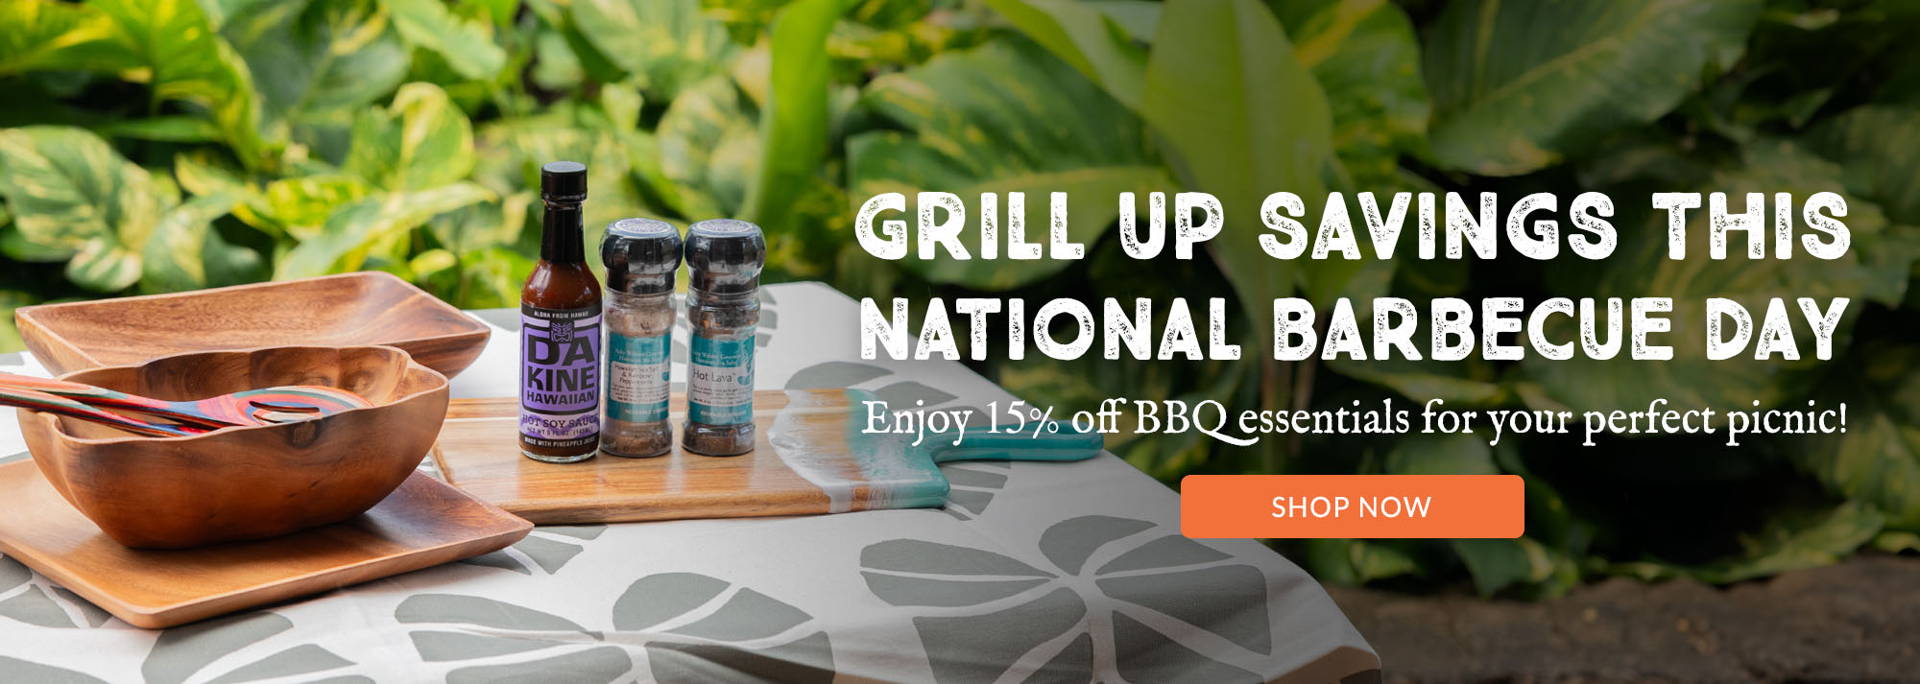 Celebrate National Barbecue Day with 15% off island spices and sauces. Get ready to fire up the grill and enjoy some delicious savings!